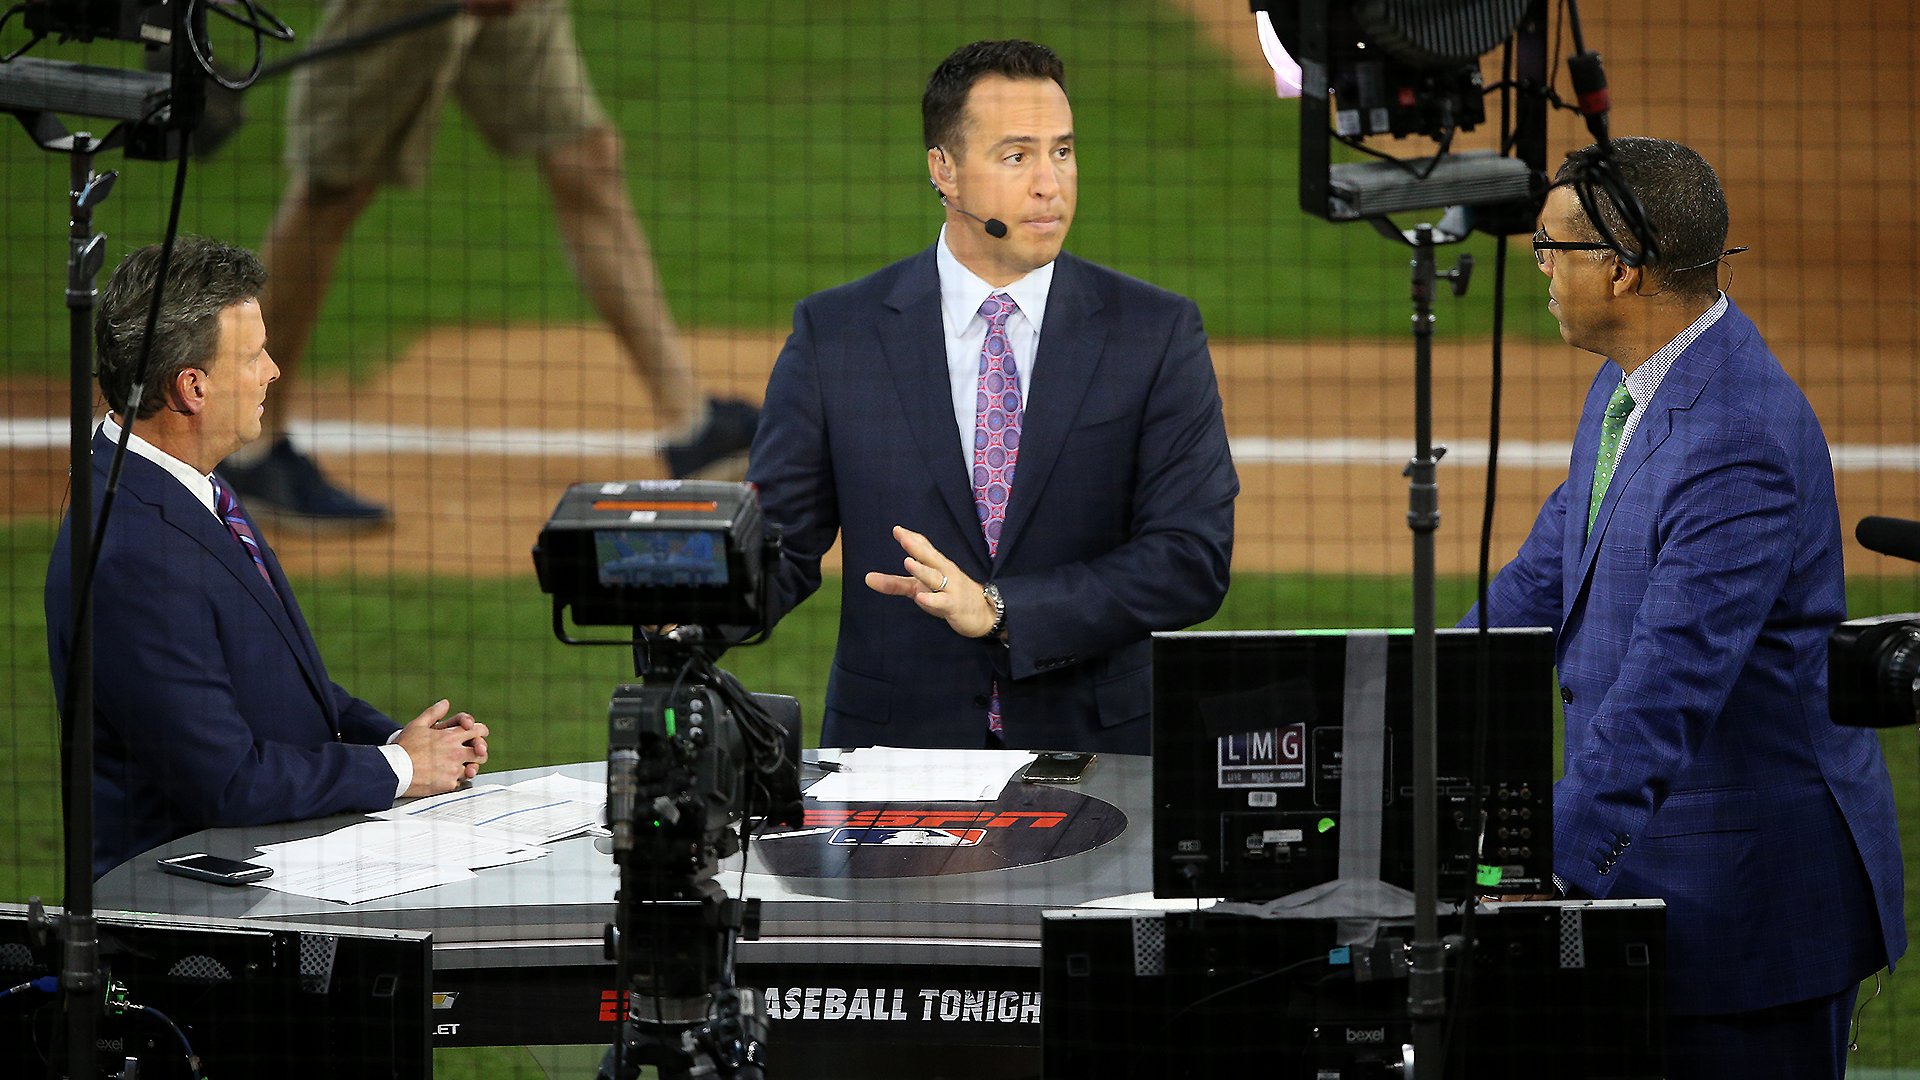 What will ESPN and Fox Sports air after the coronavirus canceled nearly every sport?